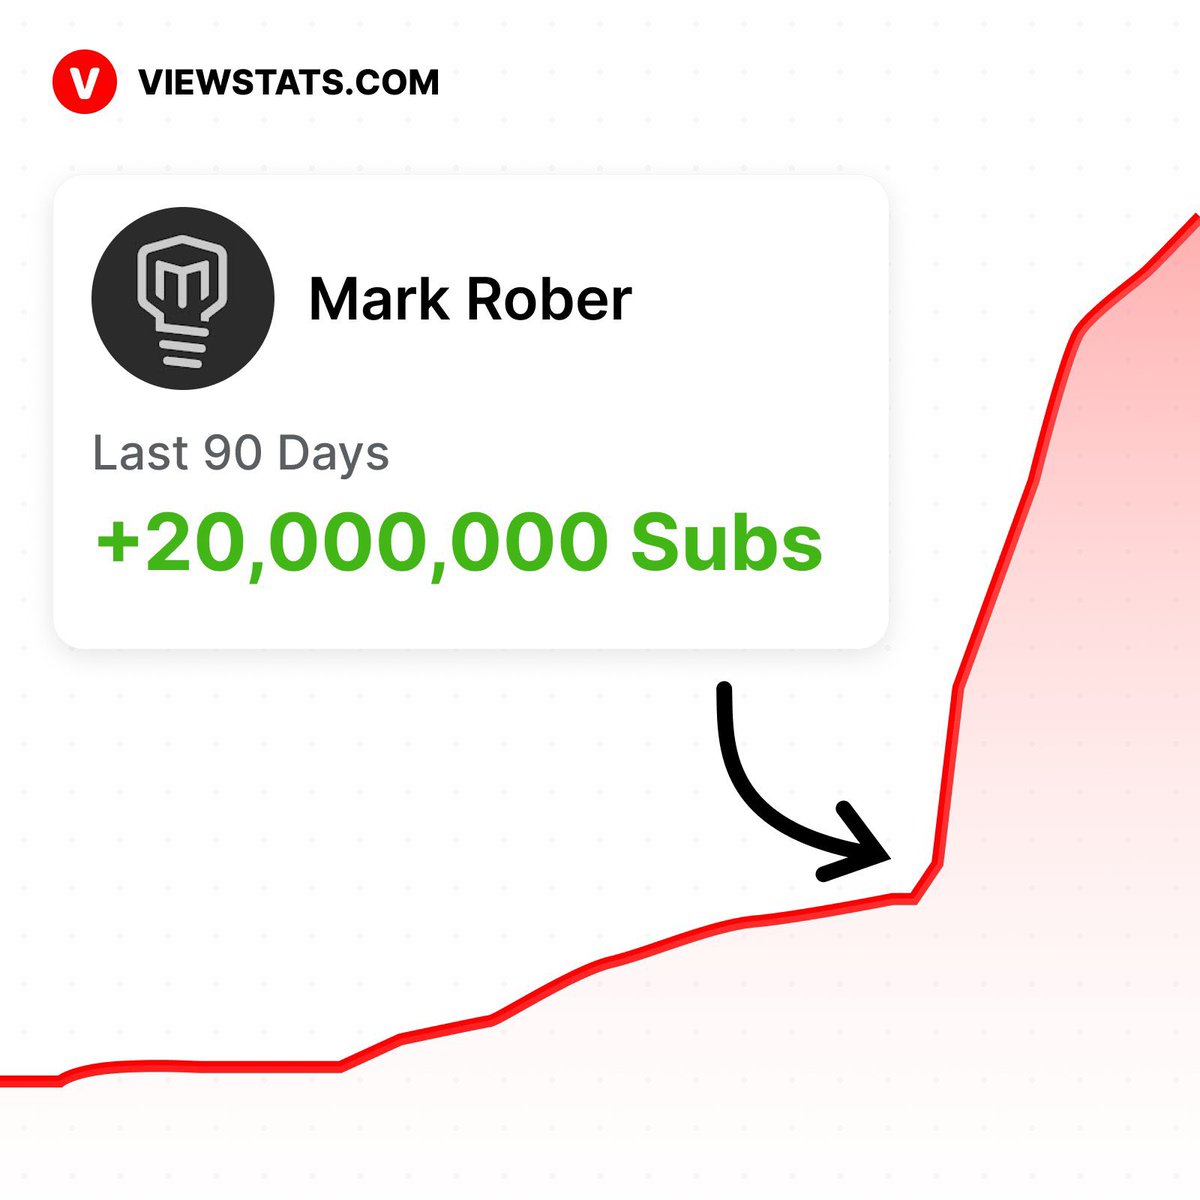 Hey @MarkRober how to get 20 Million subscribers in 3 months?